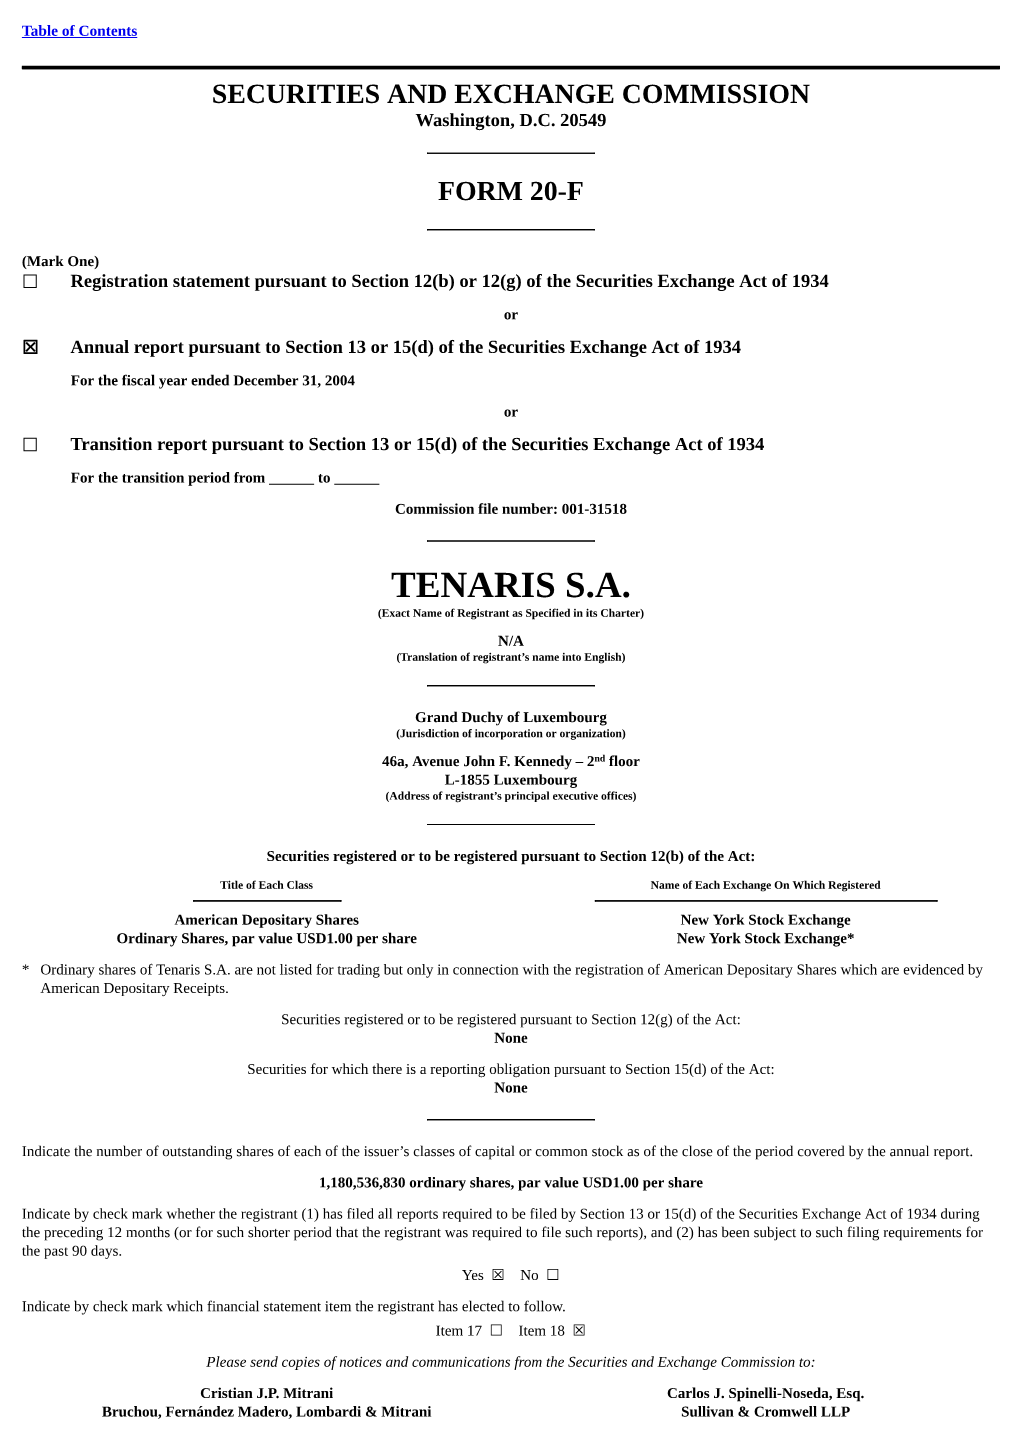 TENARIS S.A. (Exact Name of Registrant As Specified in Its Charter)